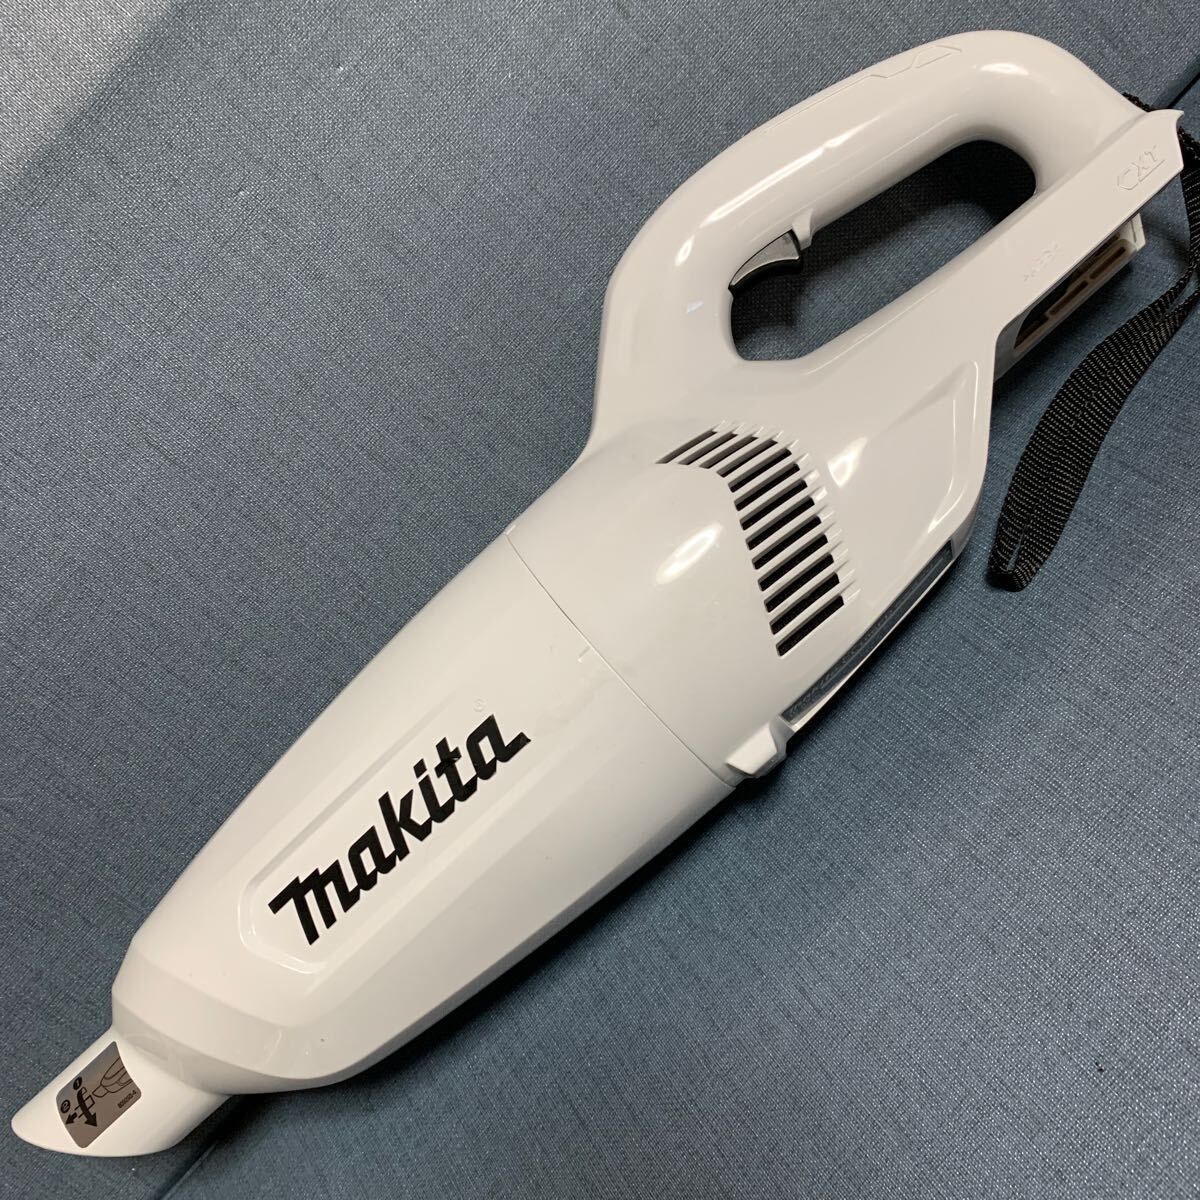 makita Makita rechargeable cleaner CL106FD